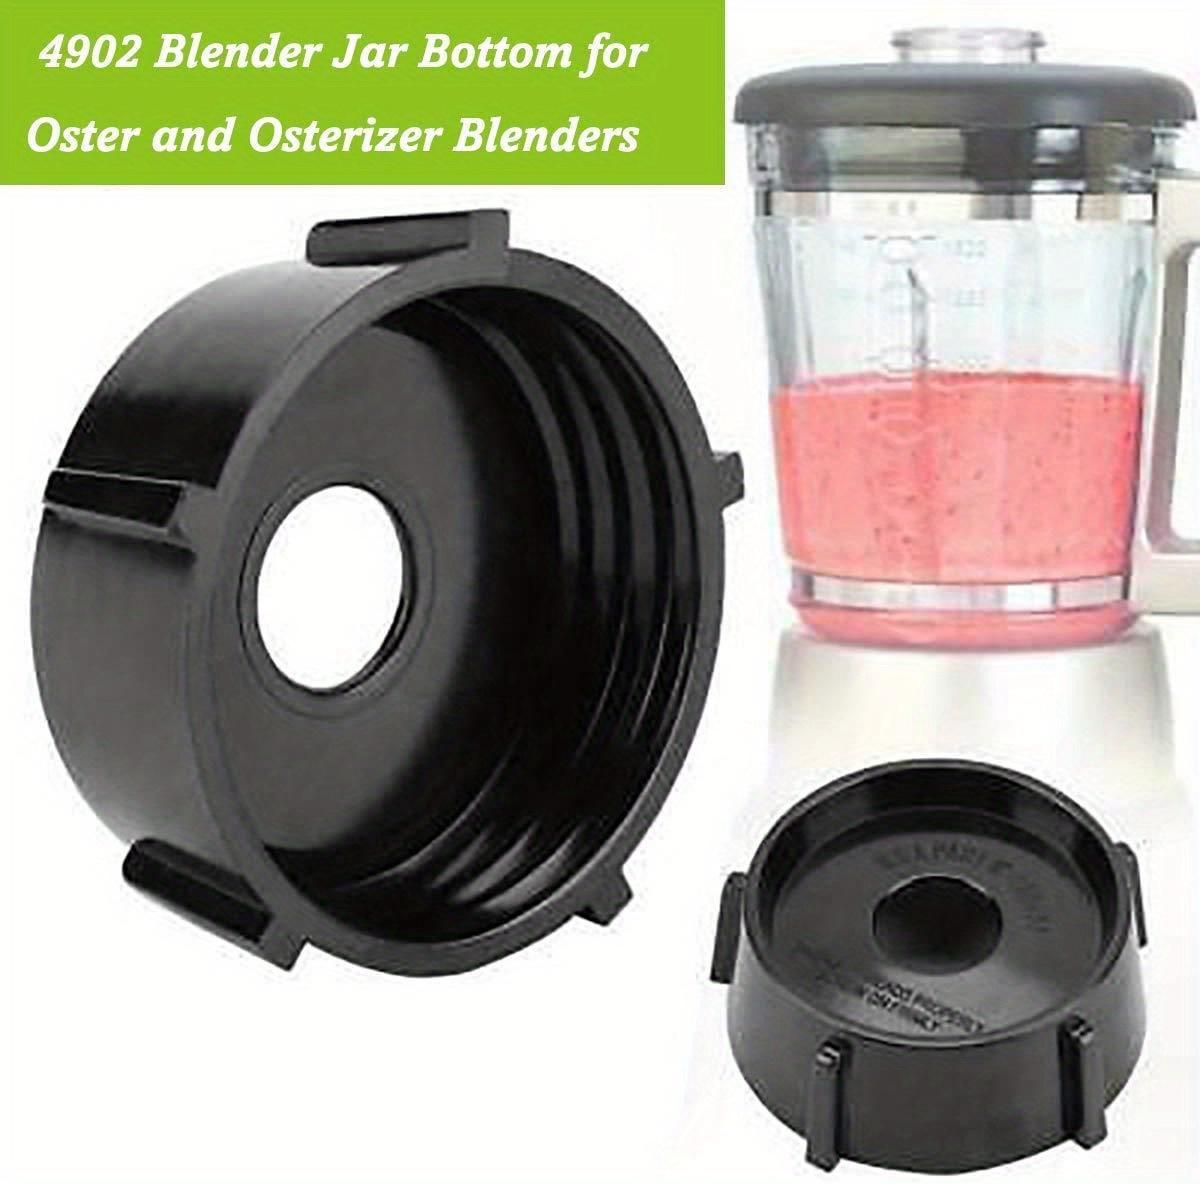 6-Piece Complete Plastic Blender Jar Replacement Kit Compatible with Oster Blenders